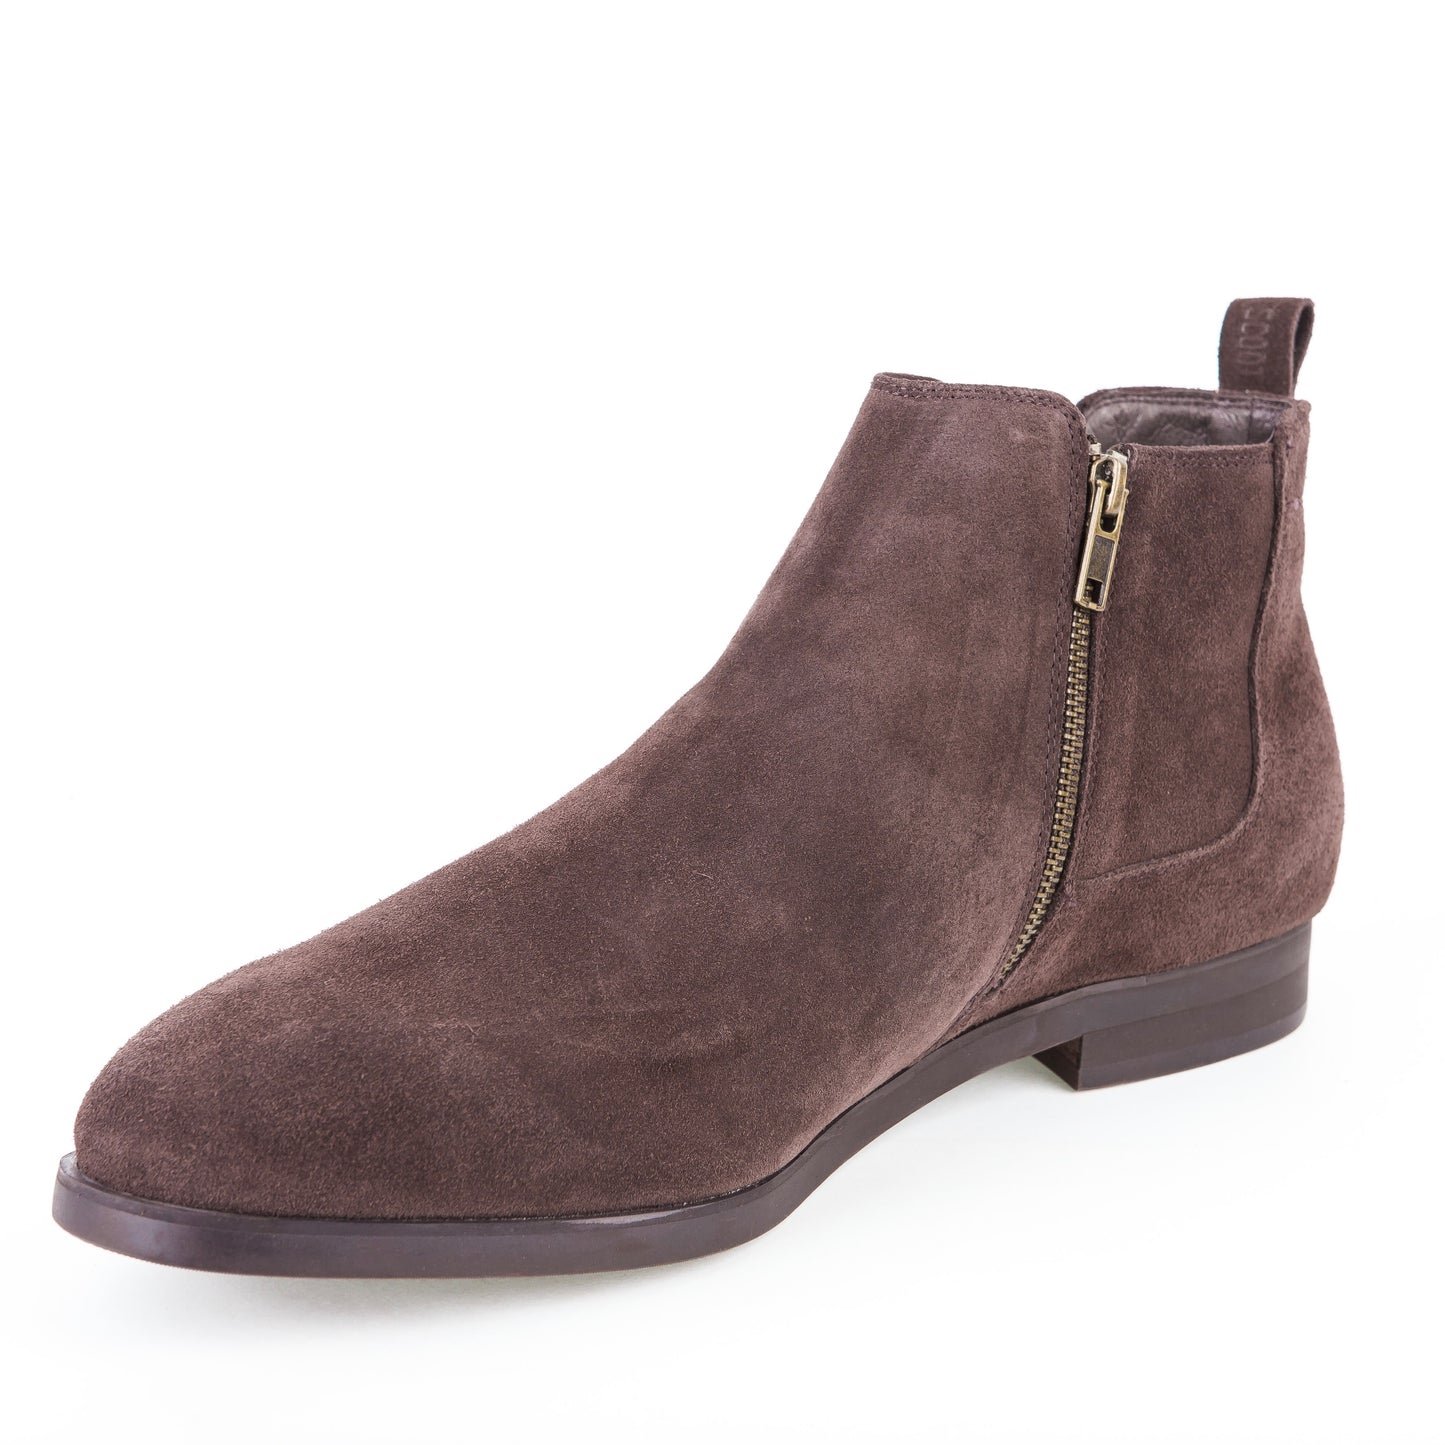 Brown suede boot